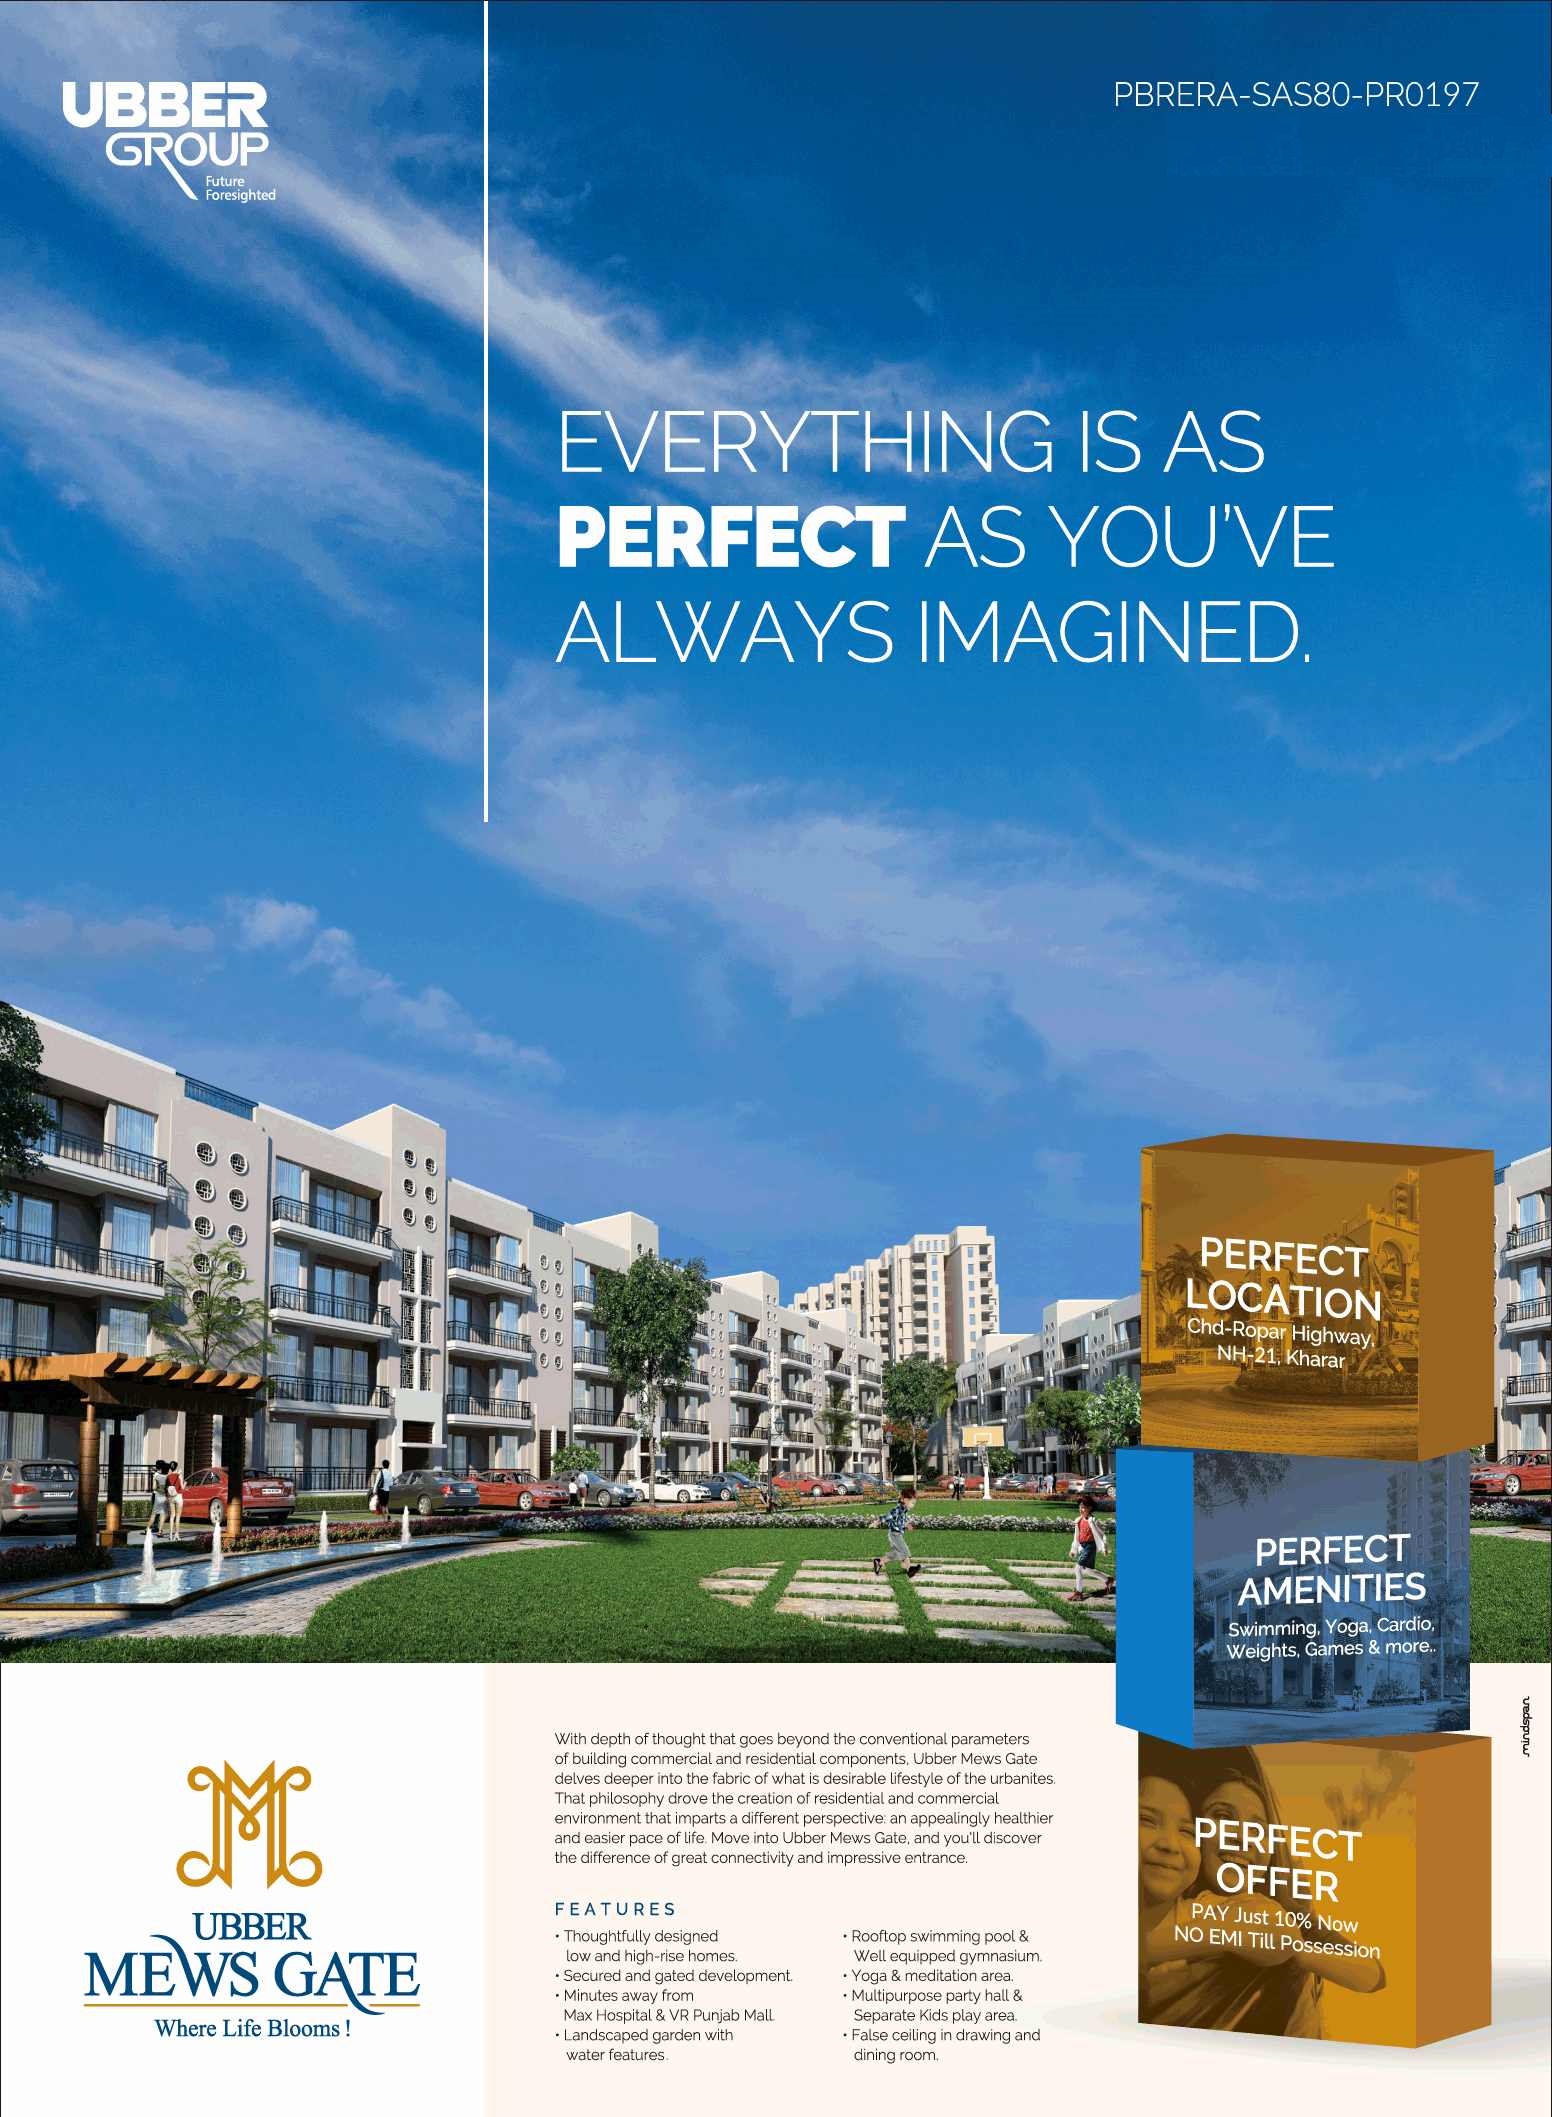 Pay just 10% & no EMI till possession at Ubber Mews Gate in Mohali